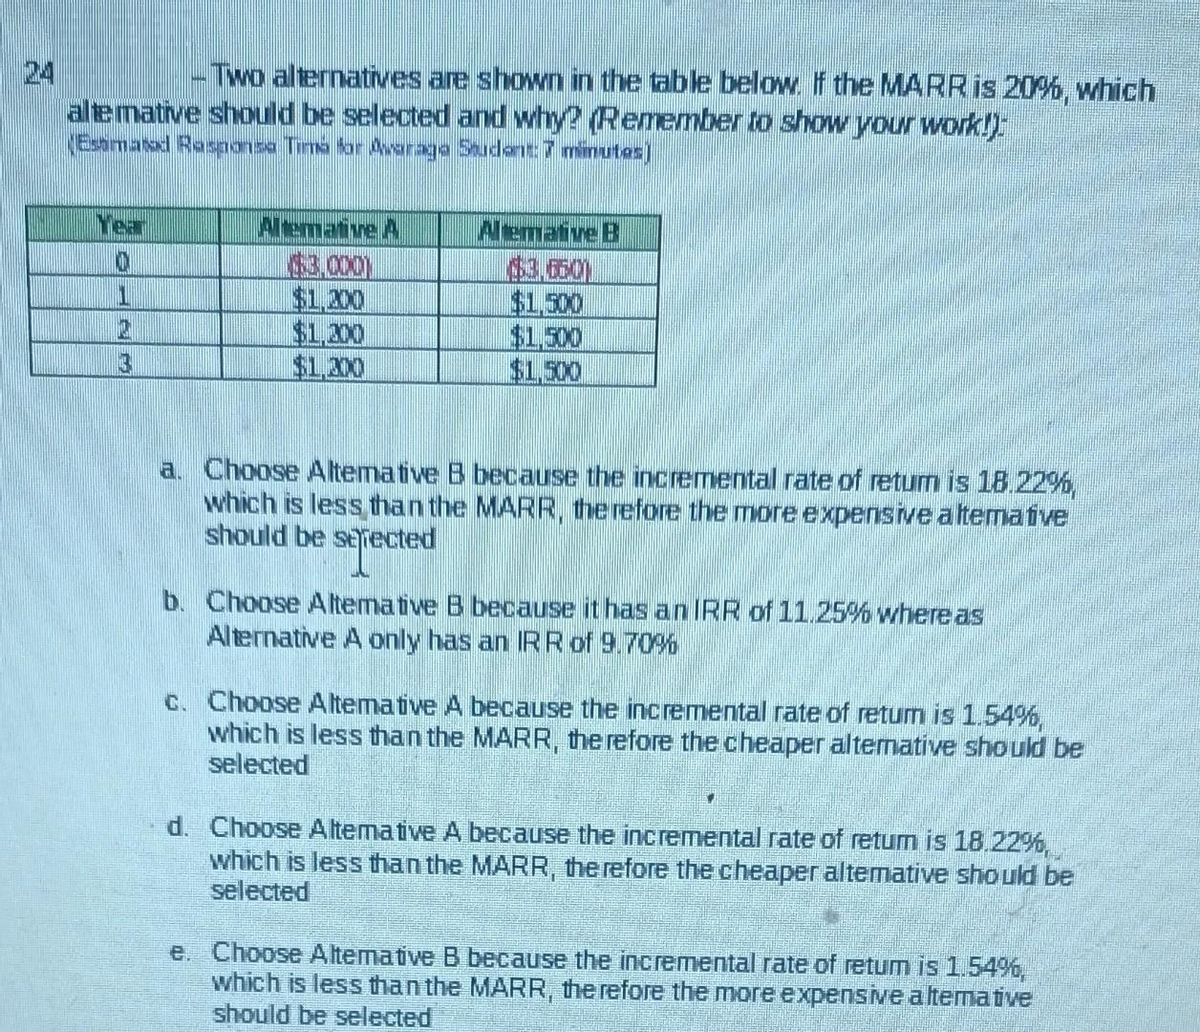 -Two alternatives are shown in the table below. If the MARR is 20%, which
alte mative should be selected and why? Remember to show your work!)
(Estimated Rasponse Times for Awarage Student: 7 minutes)
Year
C
C
Altemative A
$3.000)
$1,200
$1,300
$1,300
Alemative B
$1.500
$1.500
$1,500
a. Choose Altemative B because the incremental rate of retum is 18.22%,
which is less than the MARR, therefore the more expensive aftemative
should be selected
b. Choose Altemative B because it has an IRR of 11.25% where as
Alternative A only has an IRR of 9.70%
c. Choose Altemative A because the incremental rate of retum is 1.54%,
which is less than the MARR, therefore the cheaper alternative should be
selected
d. Choose Altemative A because the incremental rate of retum is 18.22%,
which is less than the MARR, therefore the cheaper altemative should be
selected
e. Choose Altemative B because the incremental rate of retum is 1.54%,
which is less than the MARR, therefore the more expensive altemative
should be selected